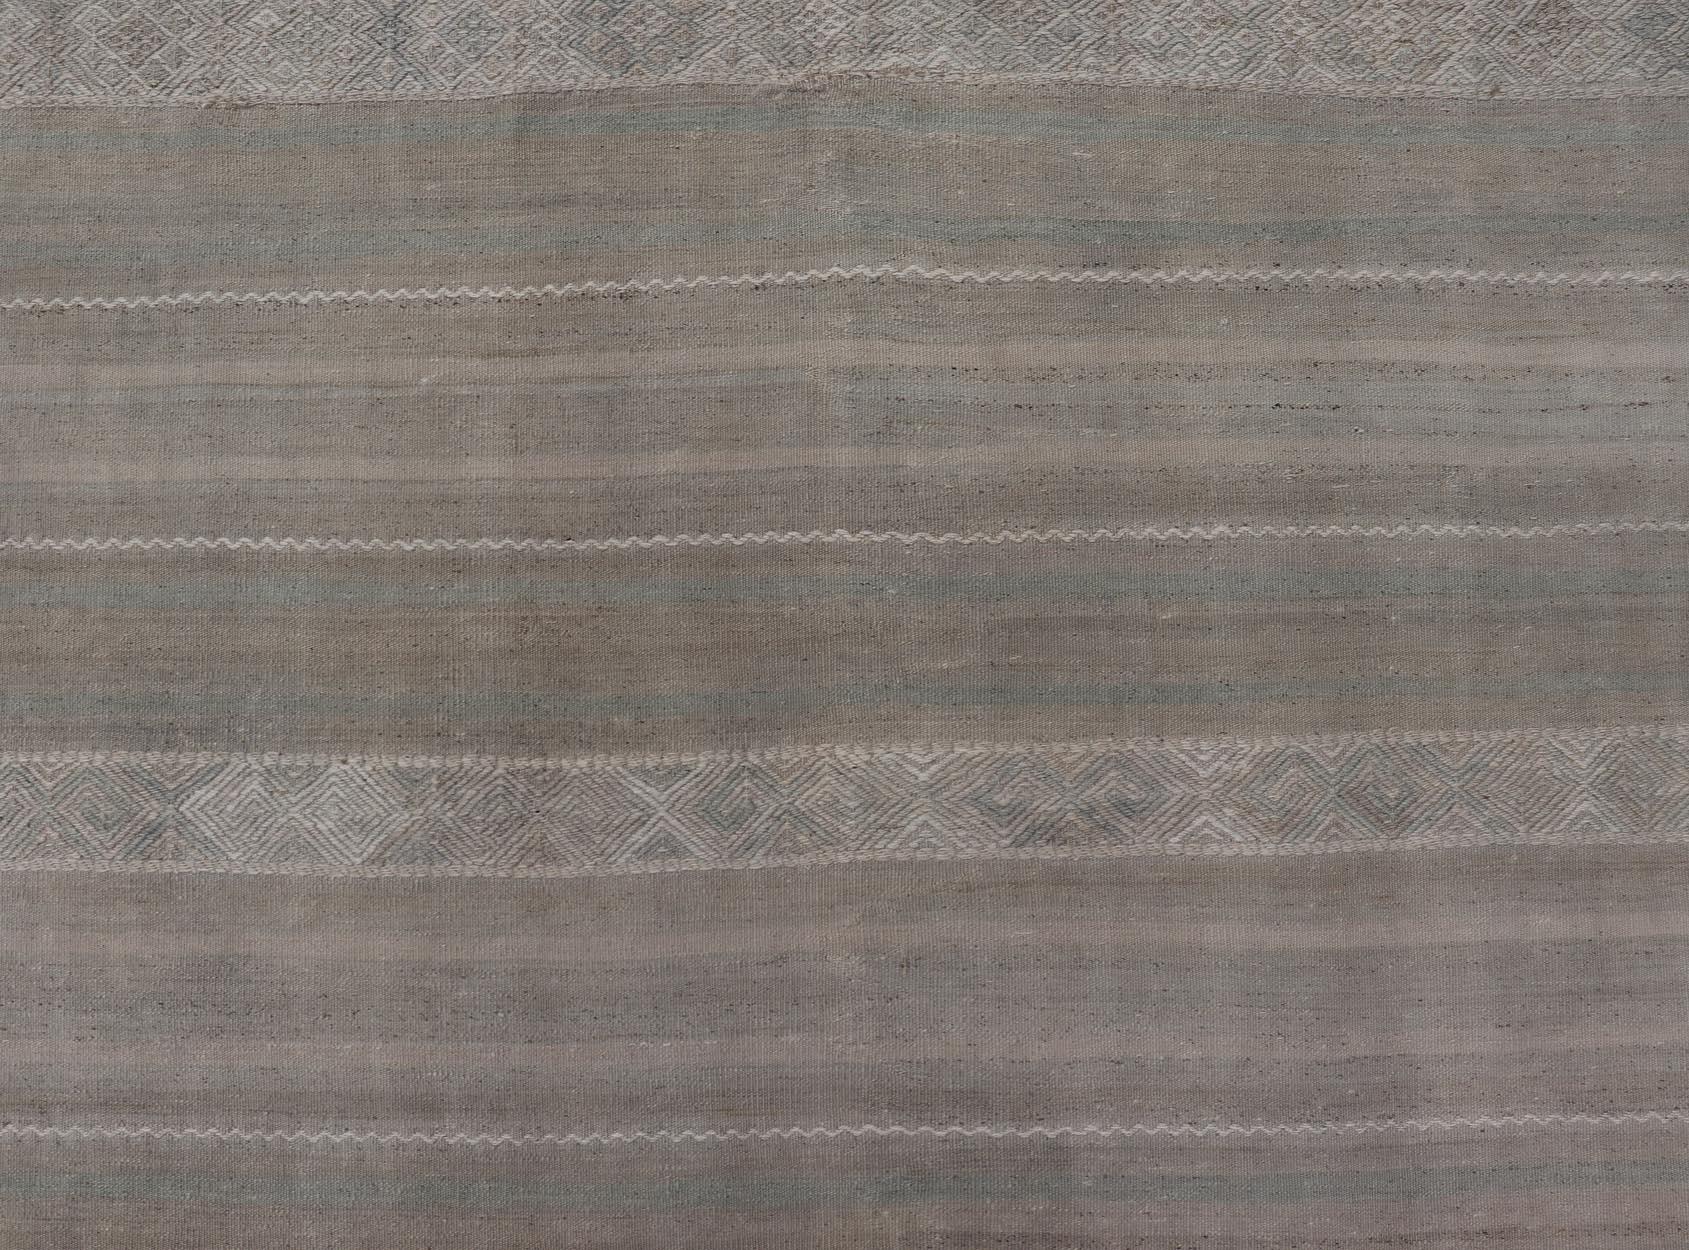 Hand-Woven Turkish Flat-Weave Kilim in Muted Colors with Stripes and Embroideries For Sale